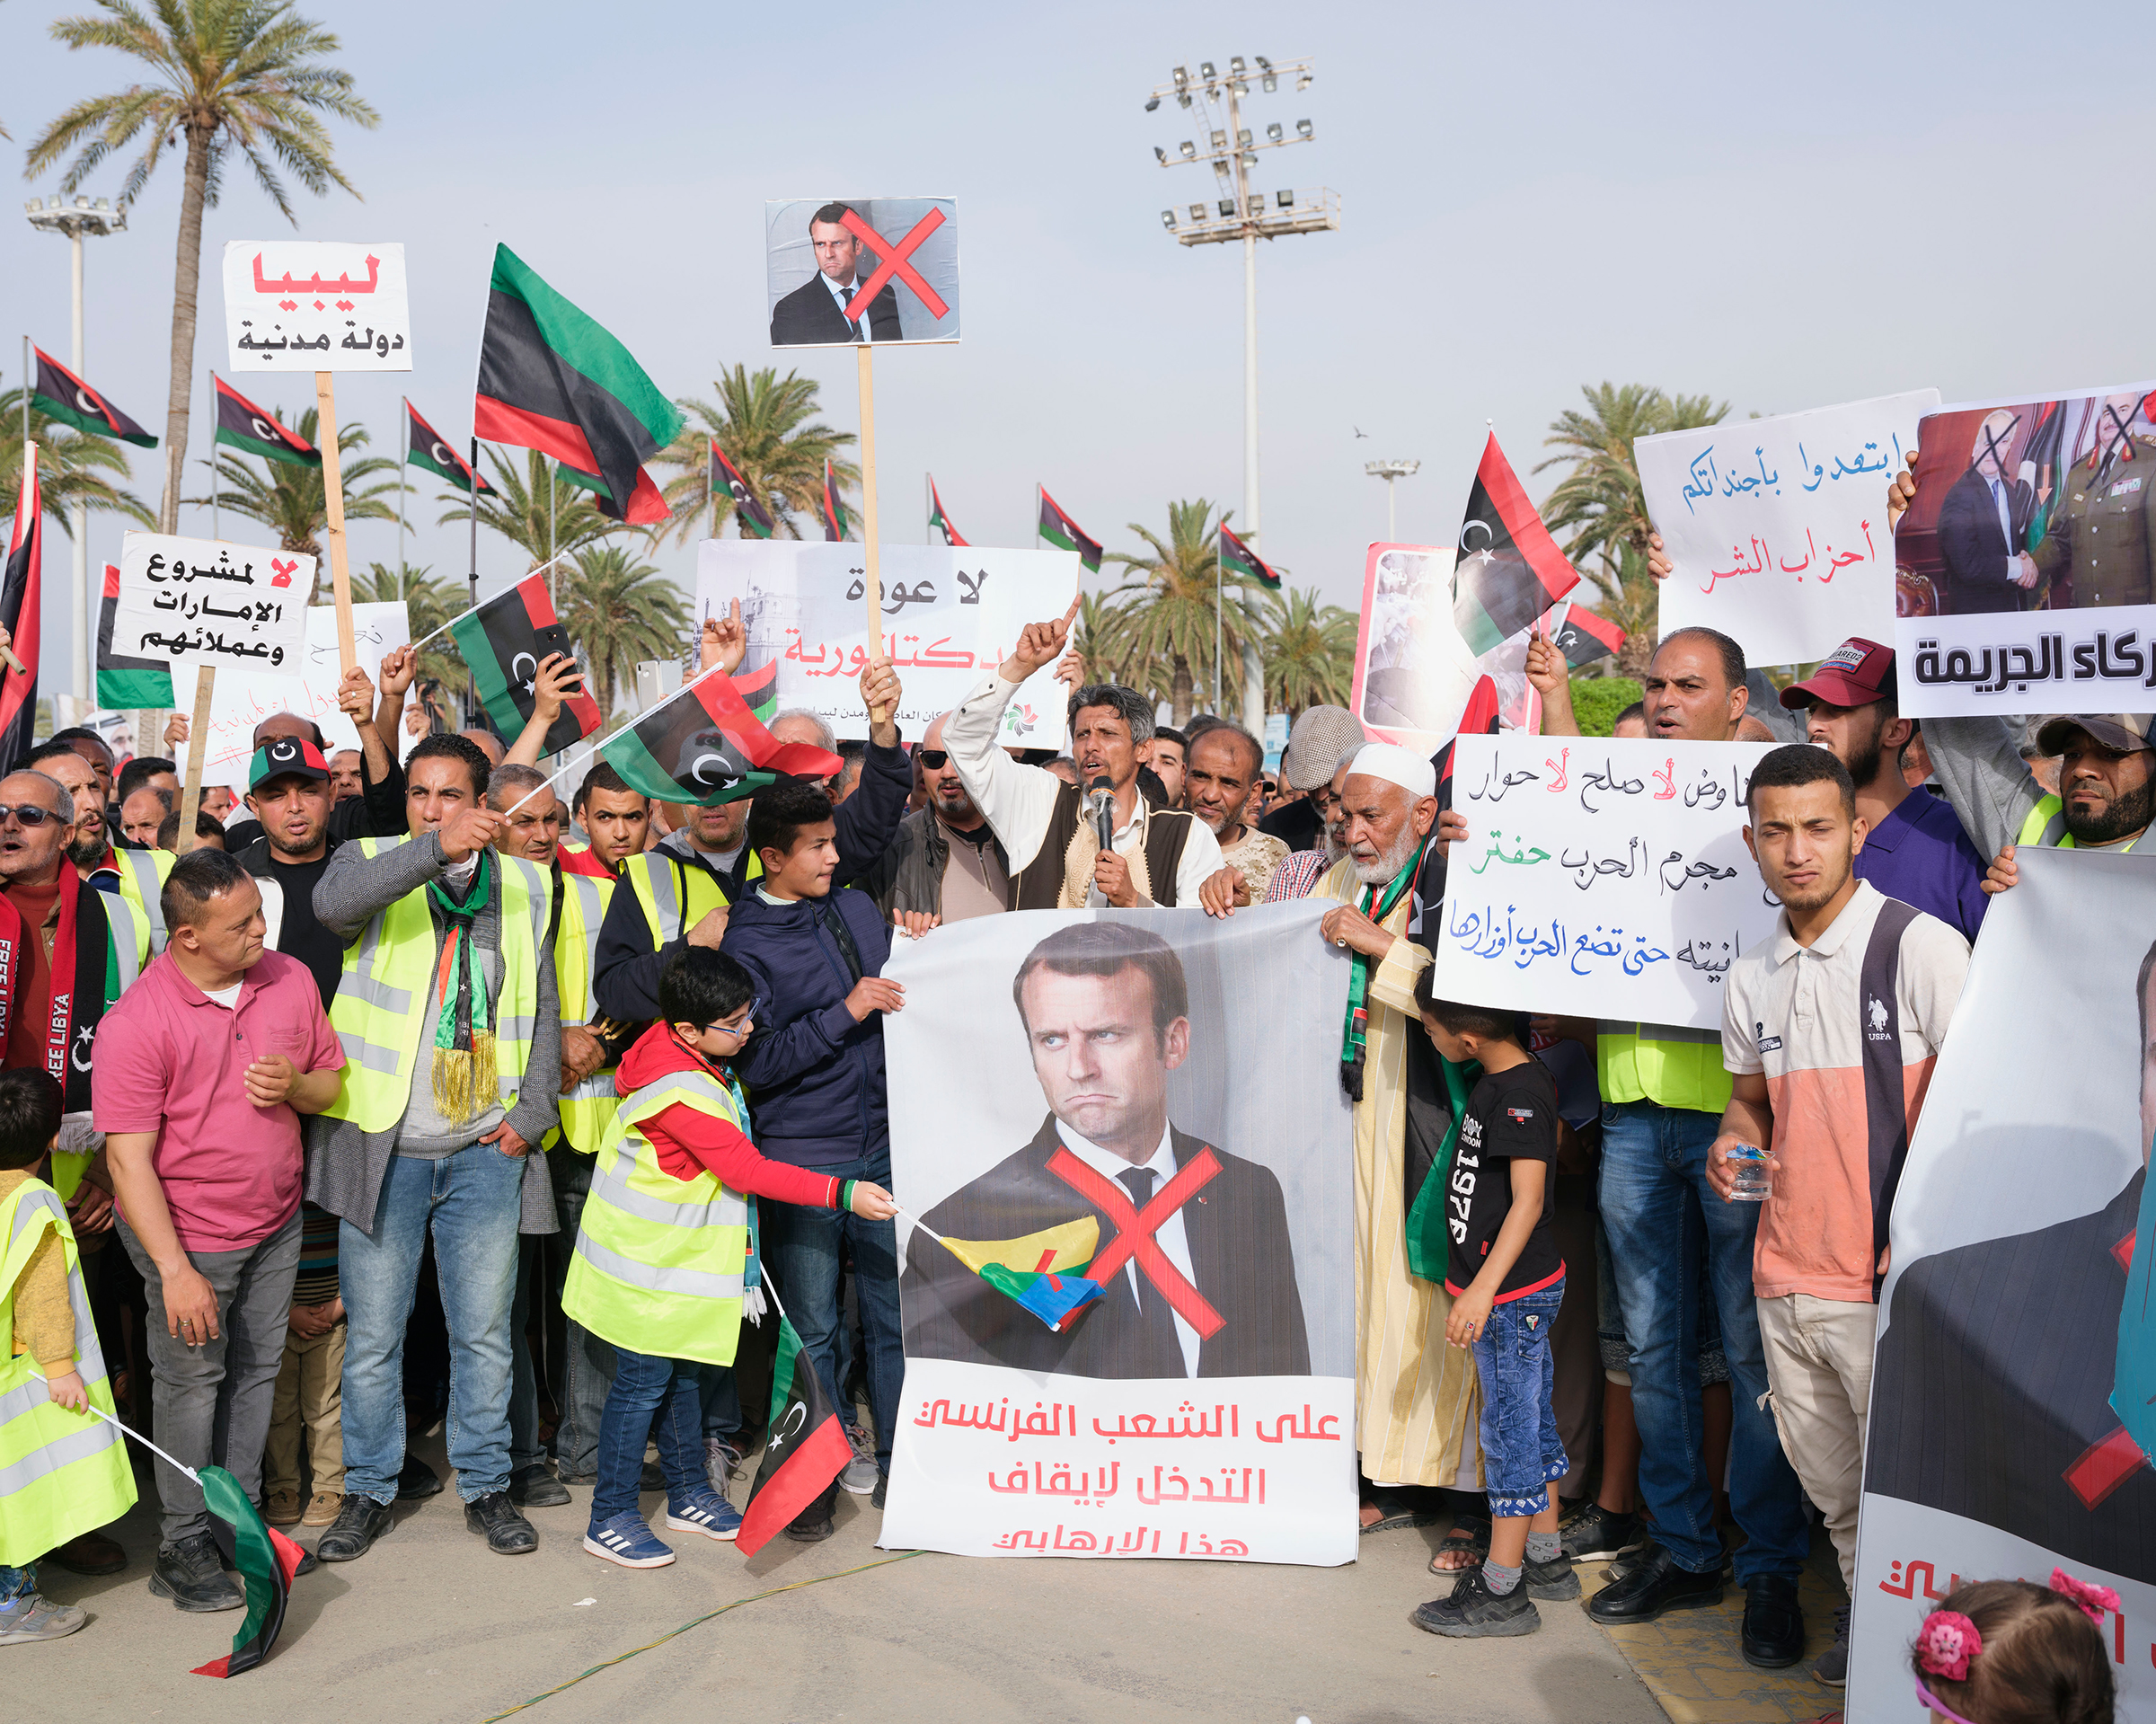 An anti-war demonstration, where protesters accused France of supporting Haftar, in Tripoli's Martyrs' Square in April. (Lorenzo Meloni—Magnum Photos)